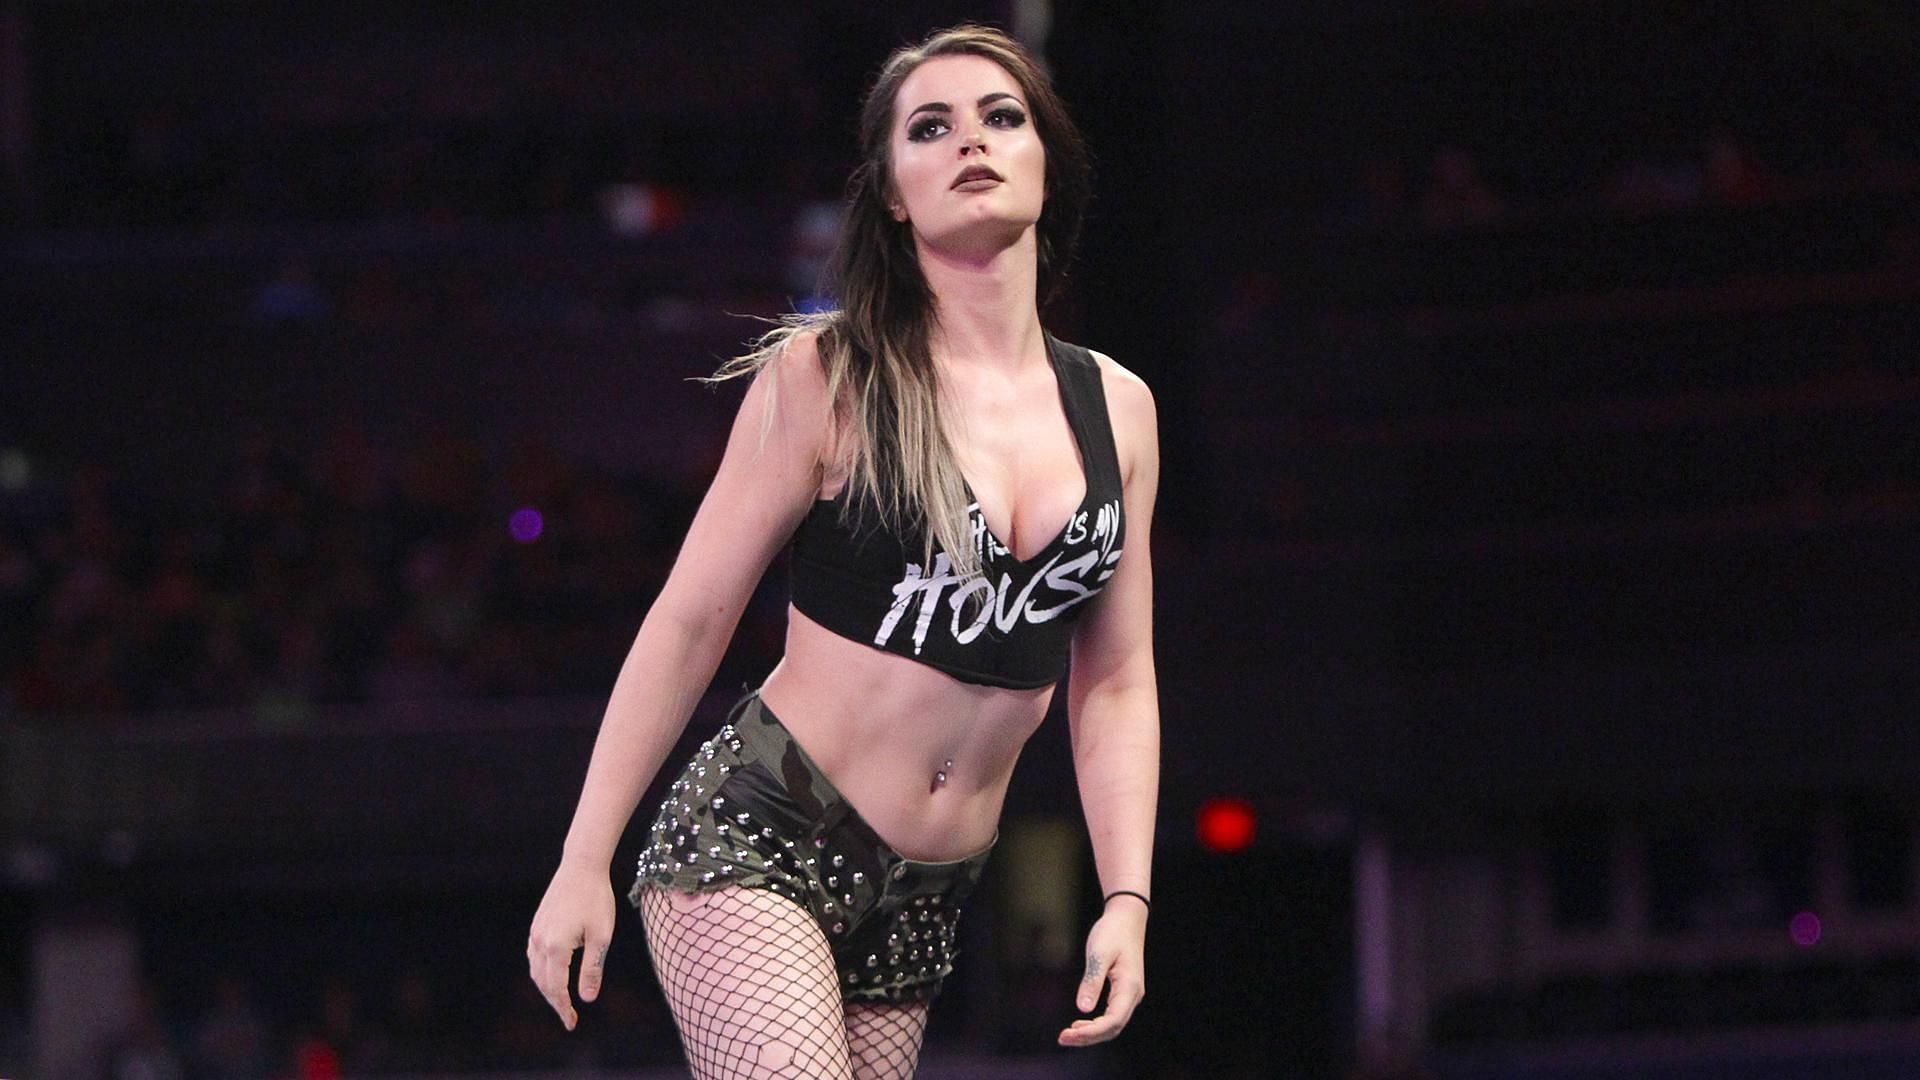 The former Divas Champion announced that she is set to leave WWE next month.